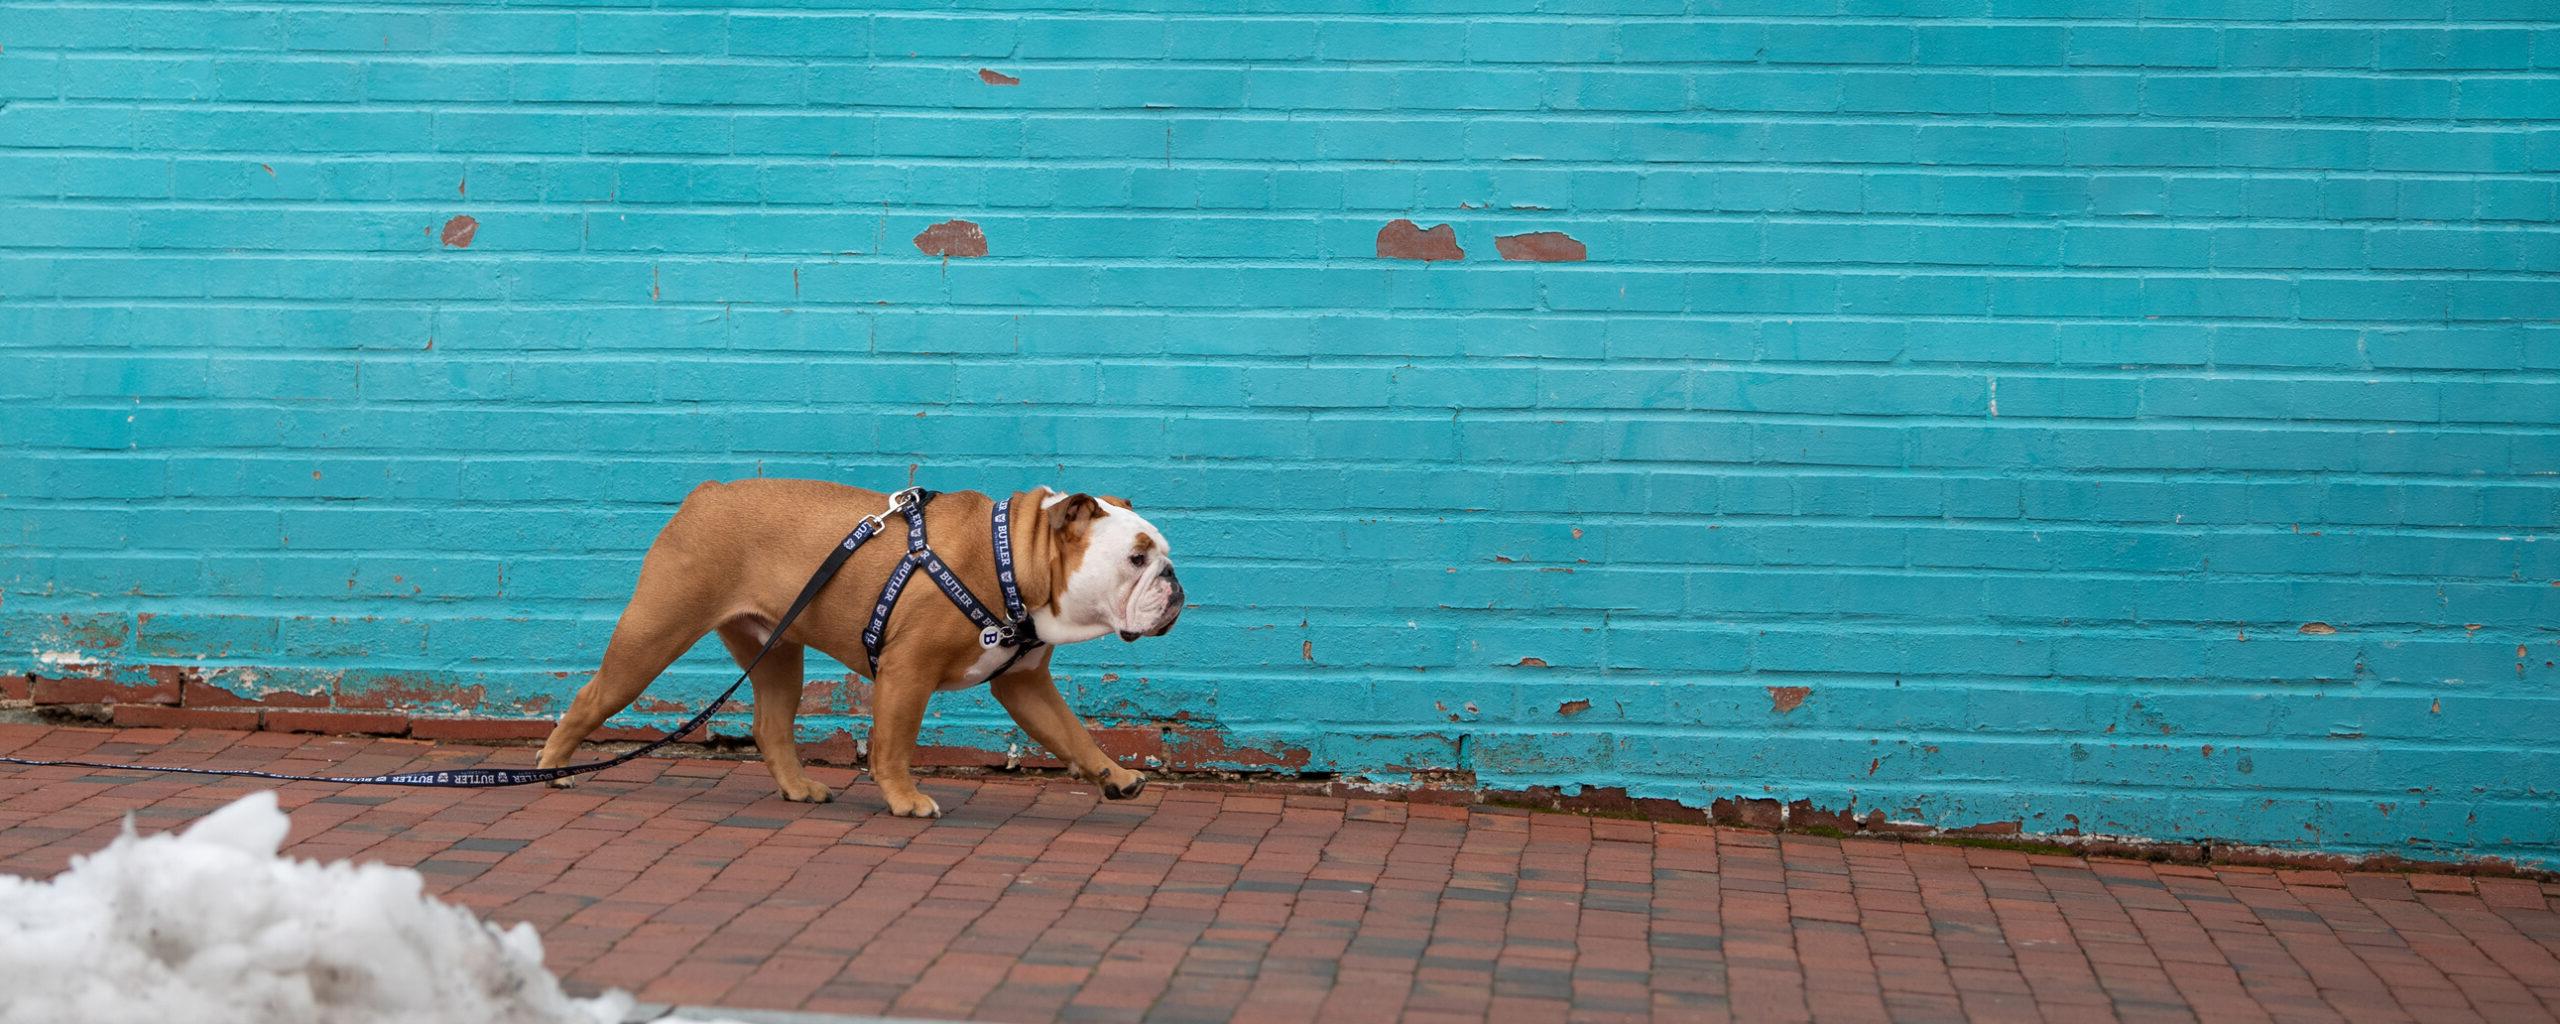 Bulldog in a blue leash and harness walking on a brick street in front of a teal wall